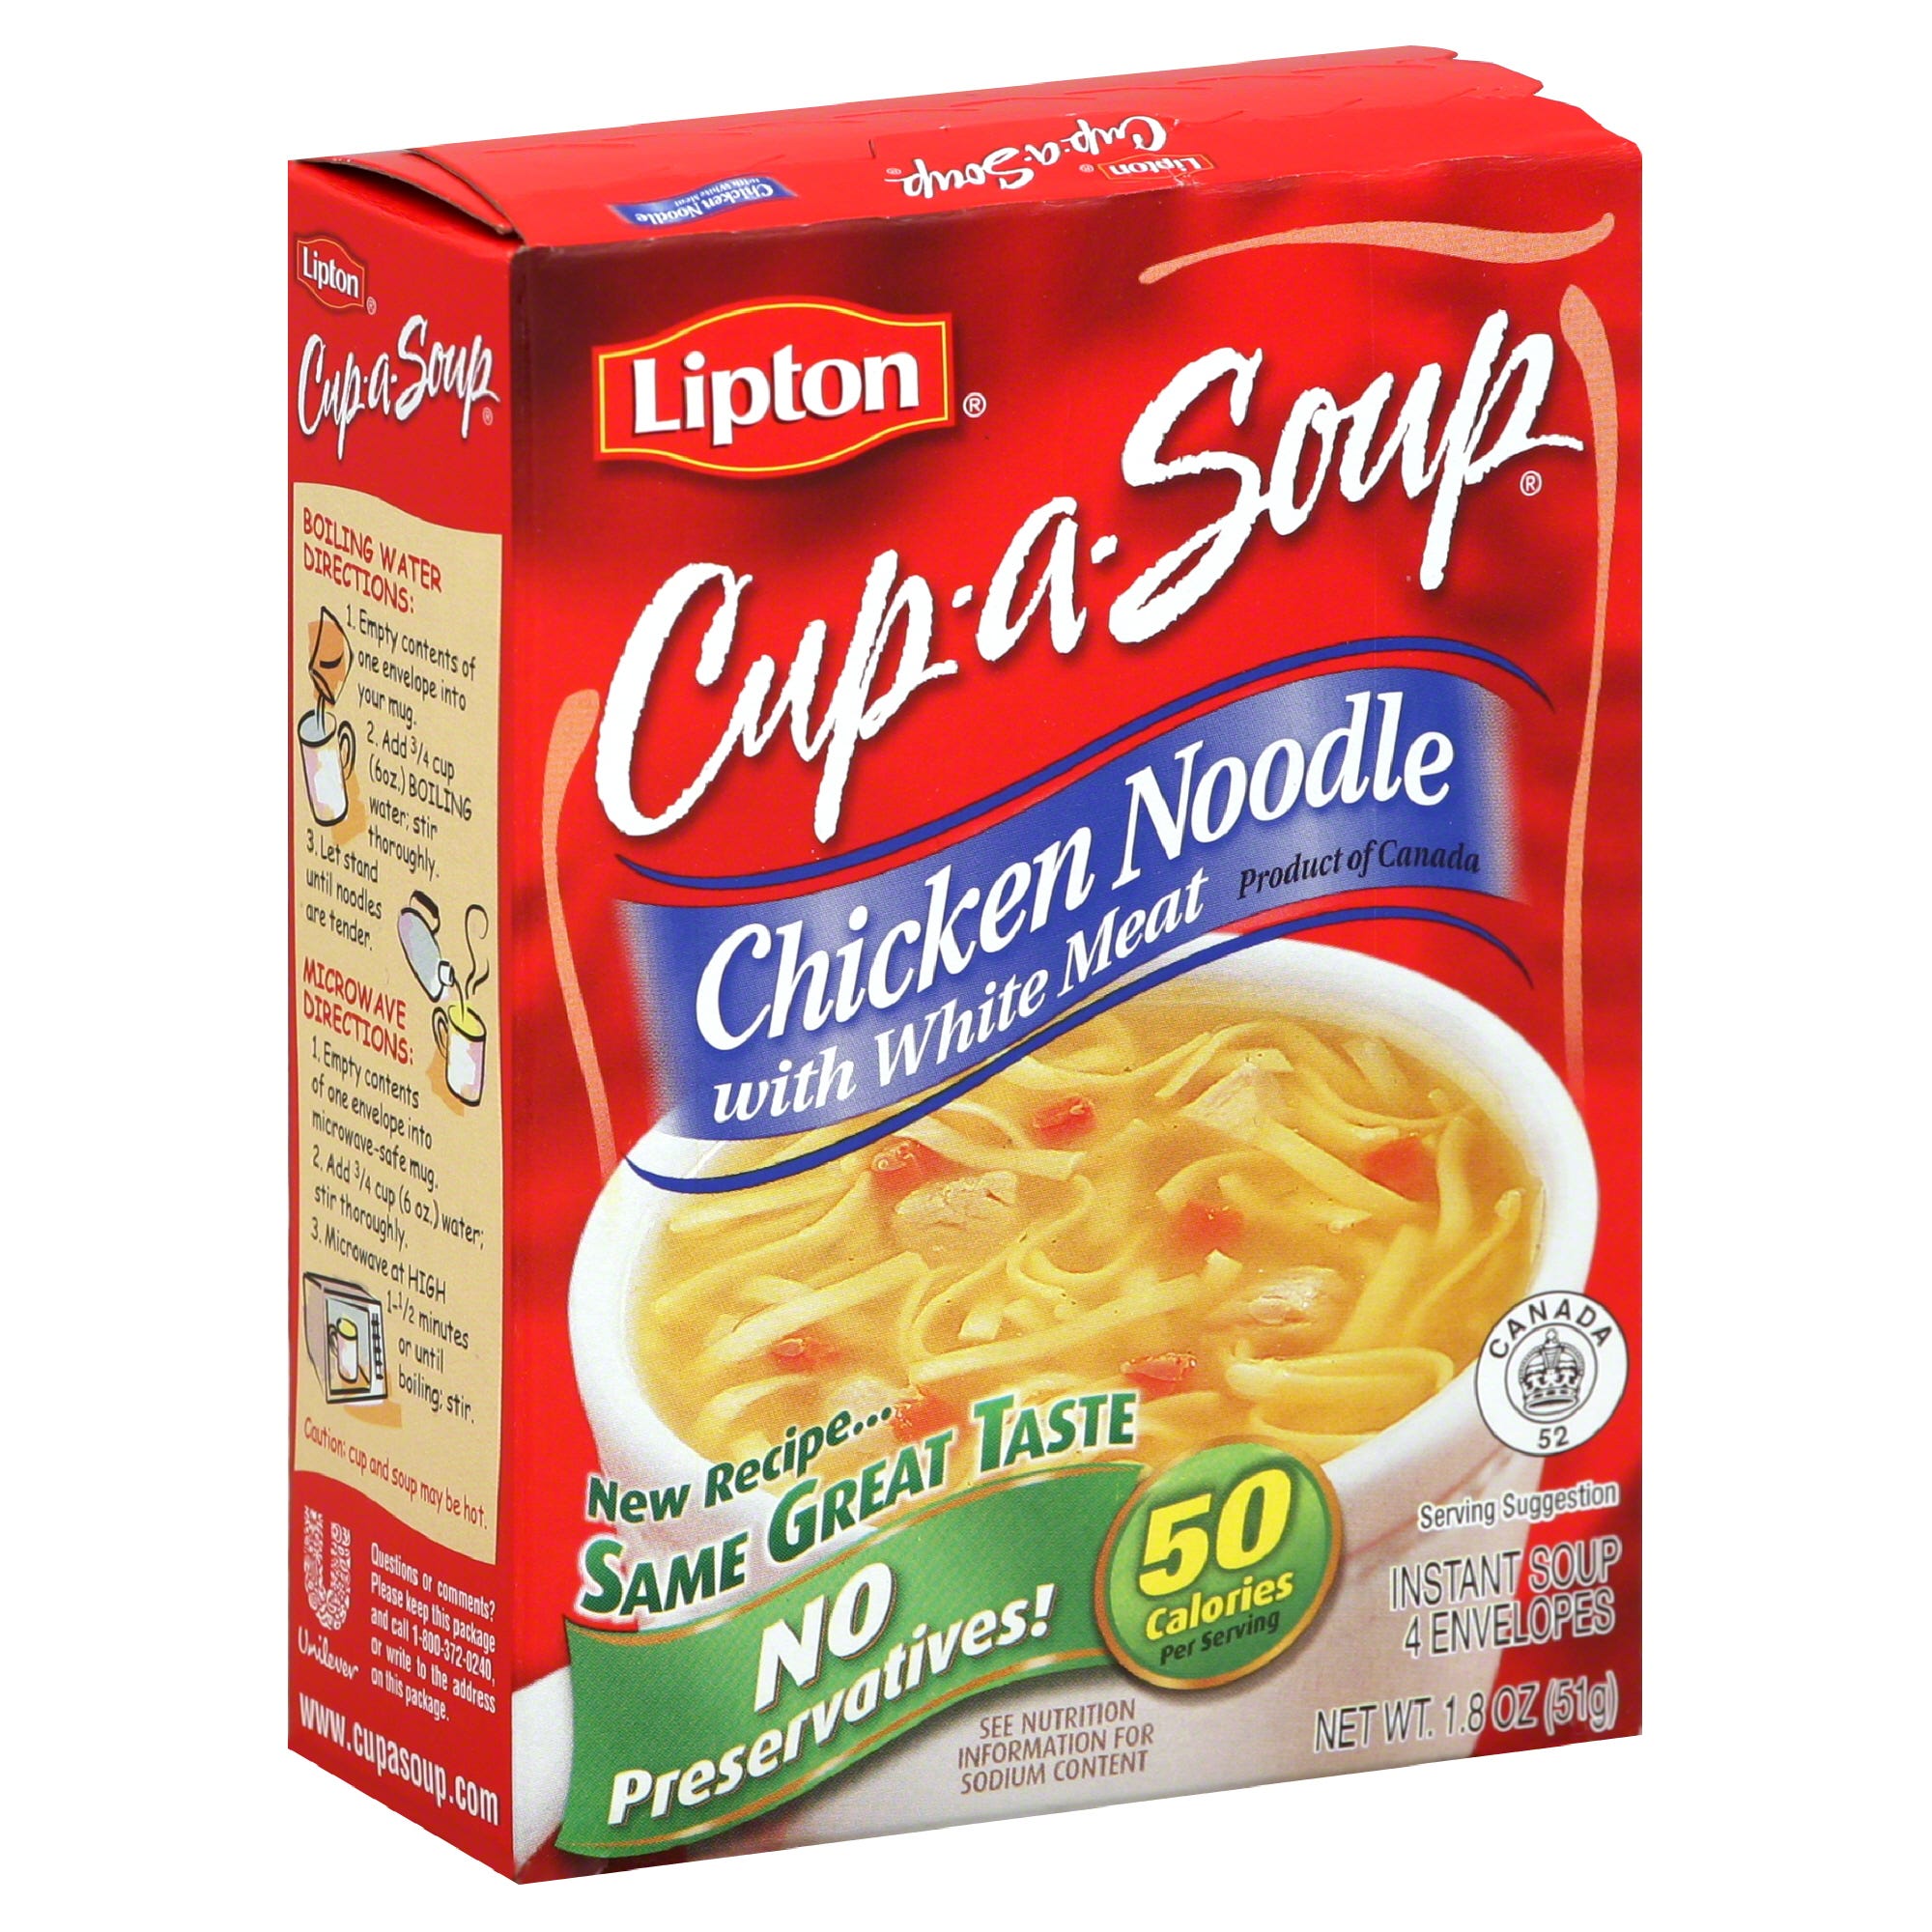 Lipton Instant Soup Packets, Chicken Noodle with White Meat, 1.8 oz - 4 ct